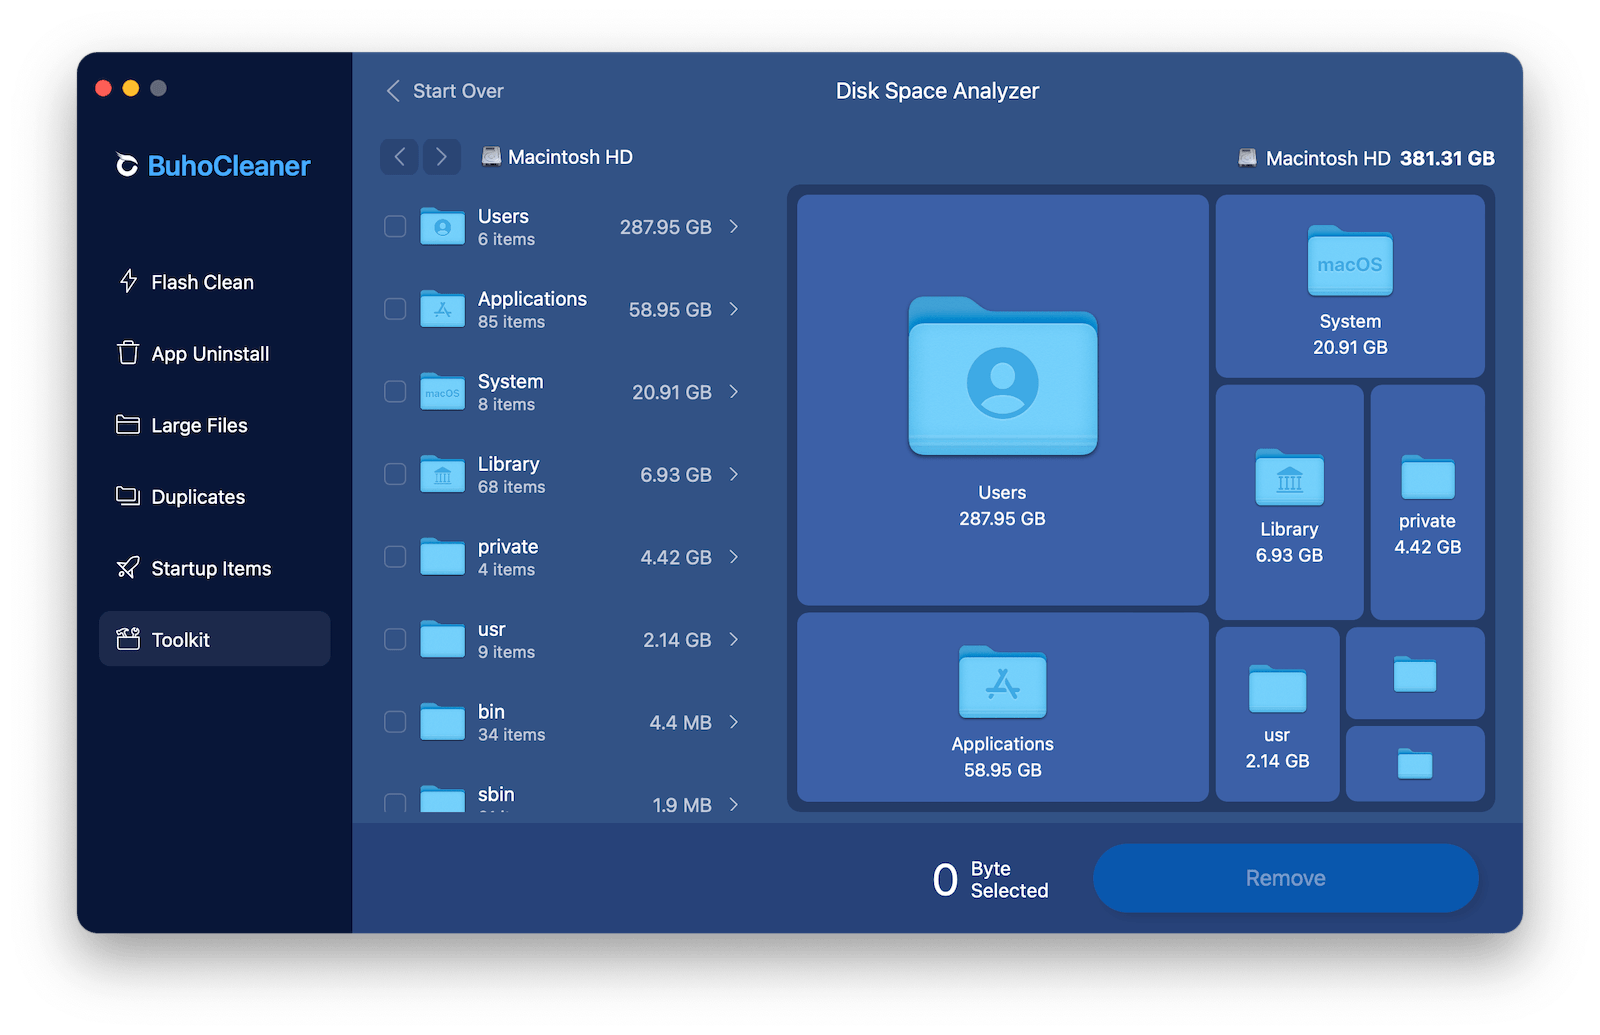 Analyze Disk Space with BuhoCleaner